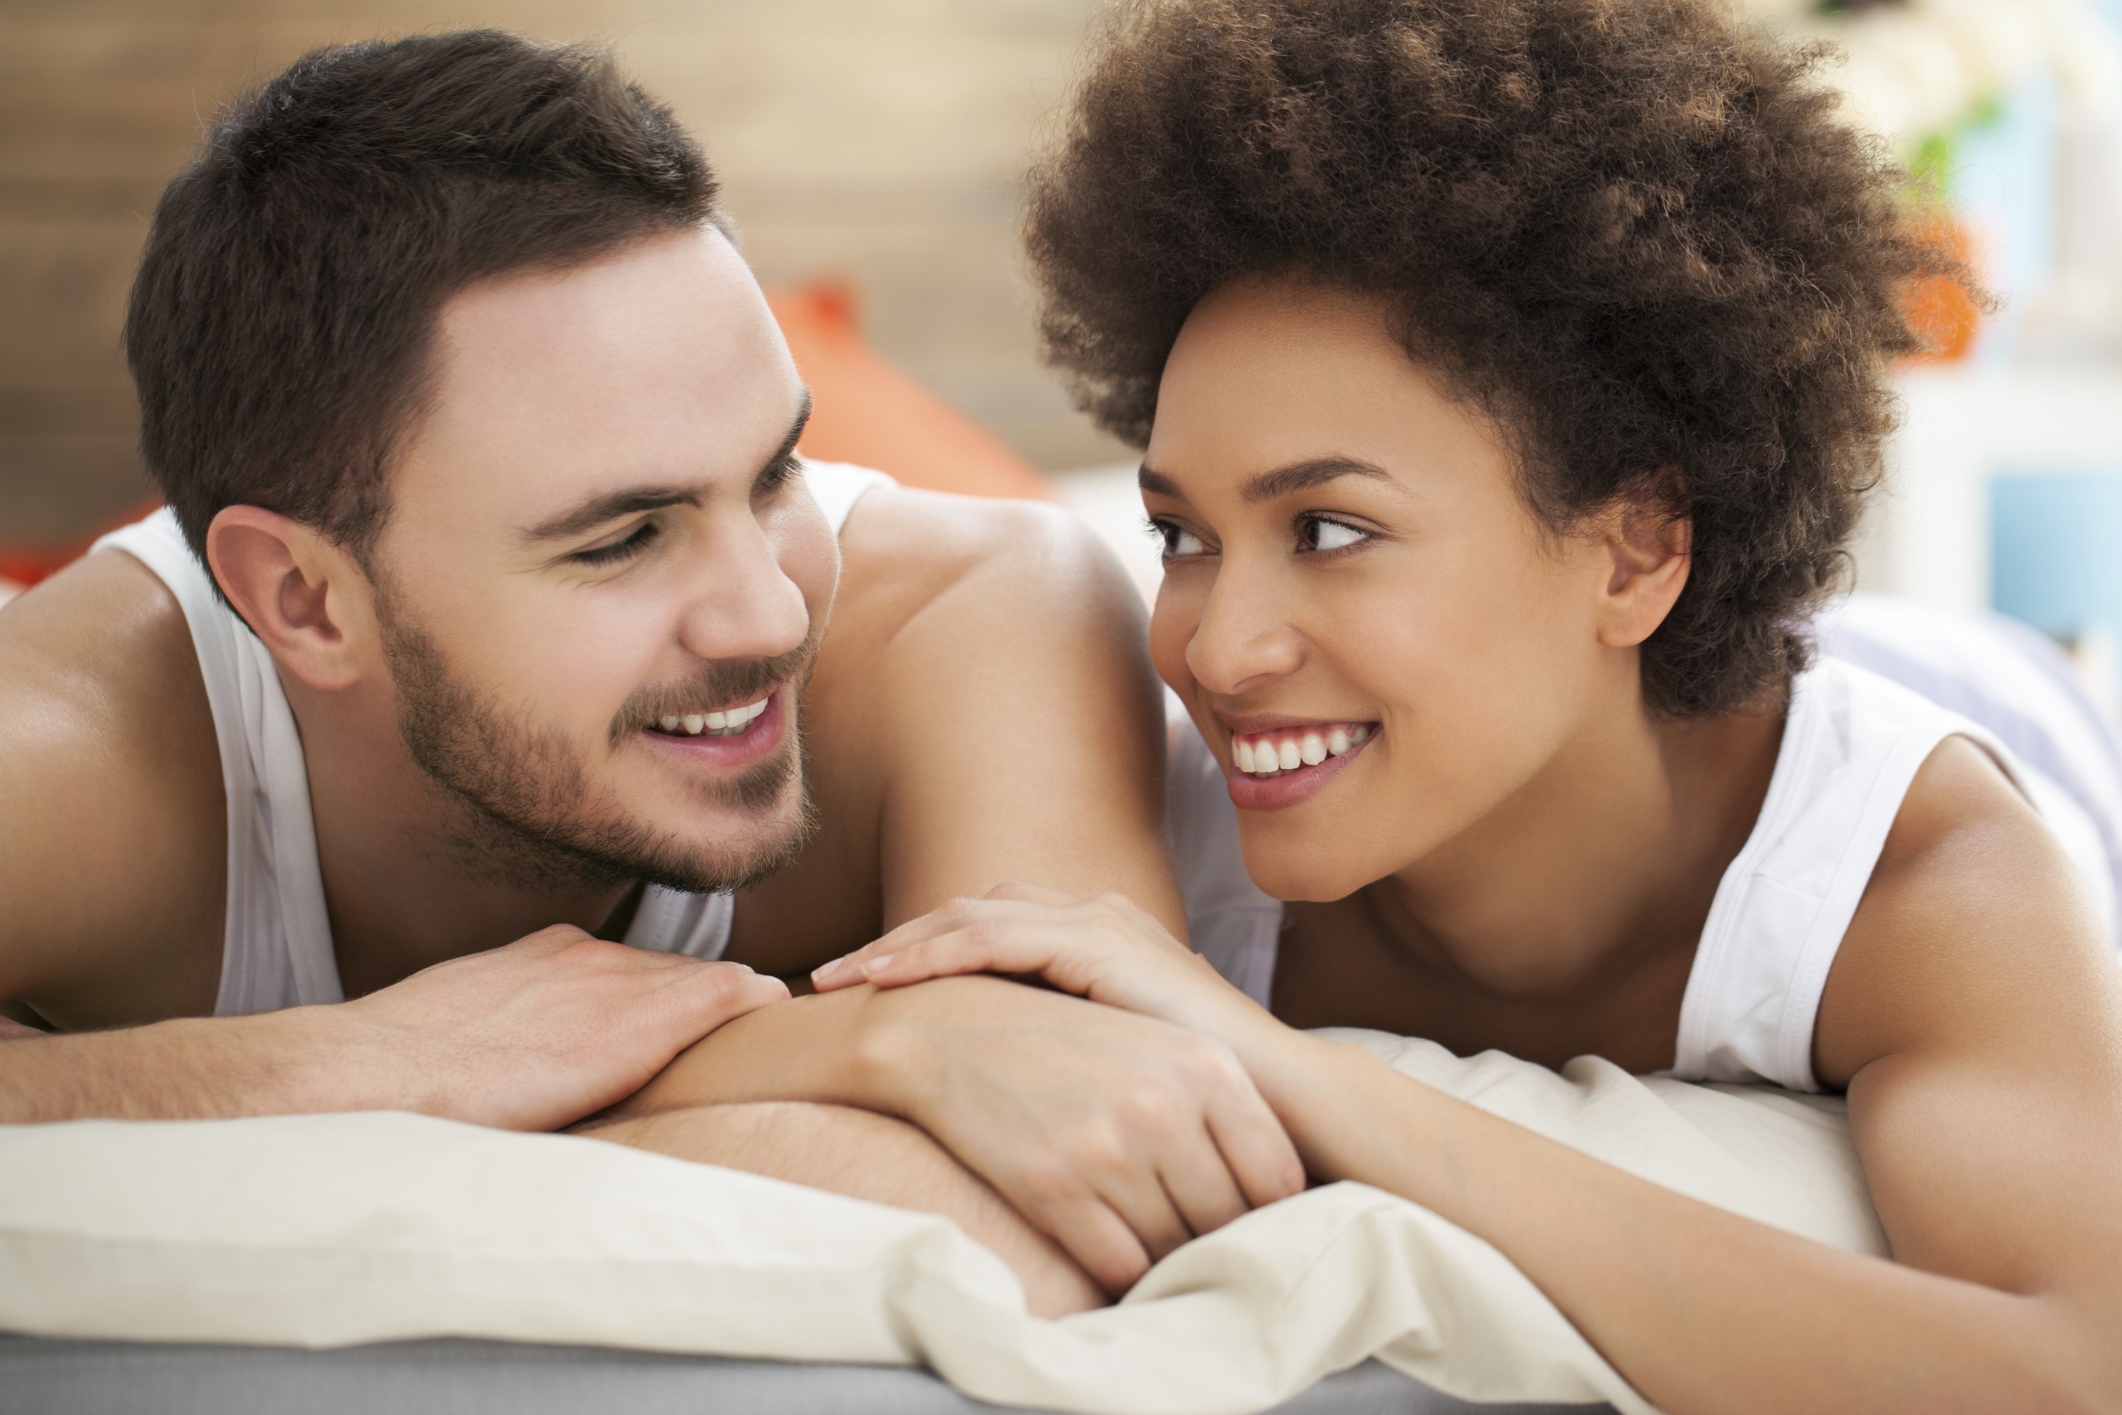 Top 10 ways to improve your relationship